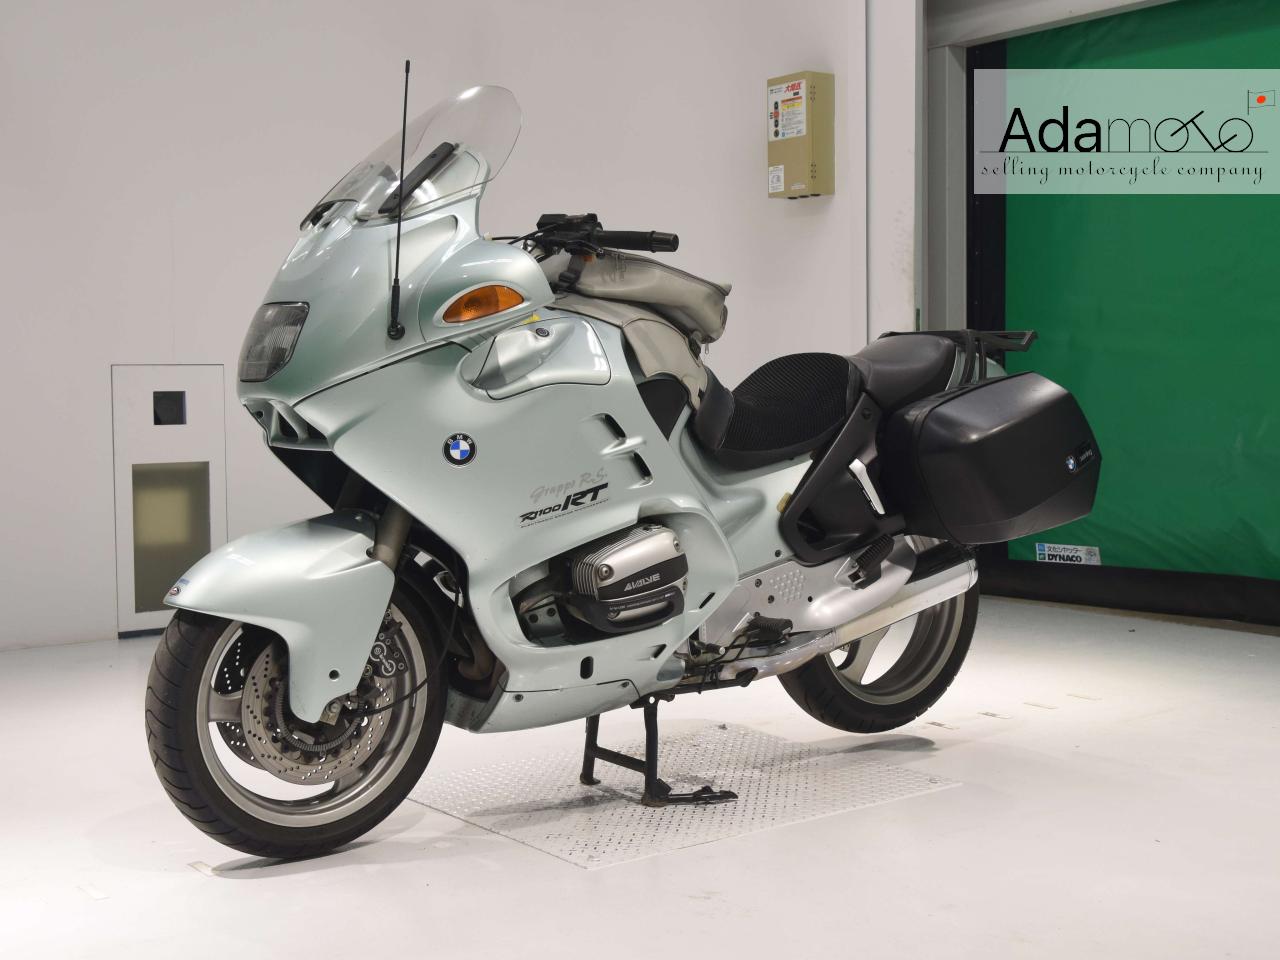 BMW R1100RT - Adamoto - Motorcycles from Japan